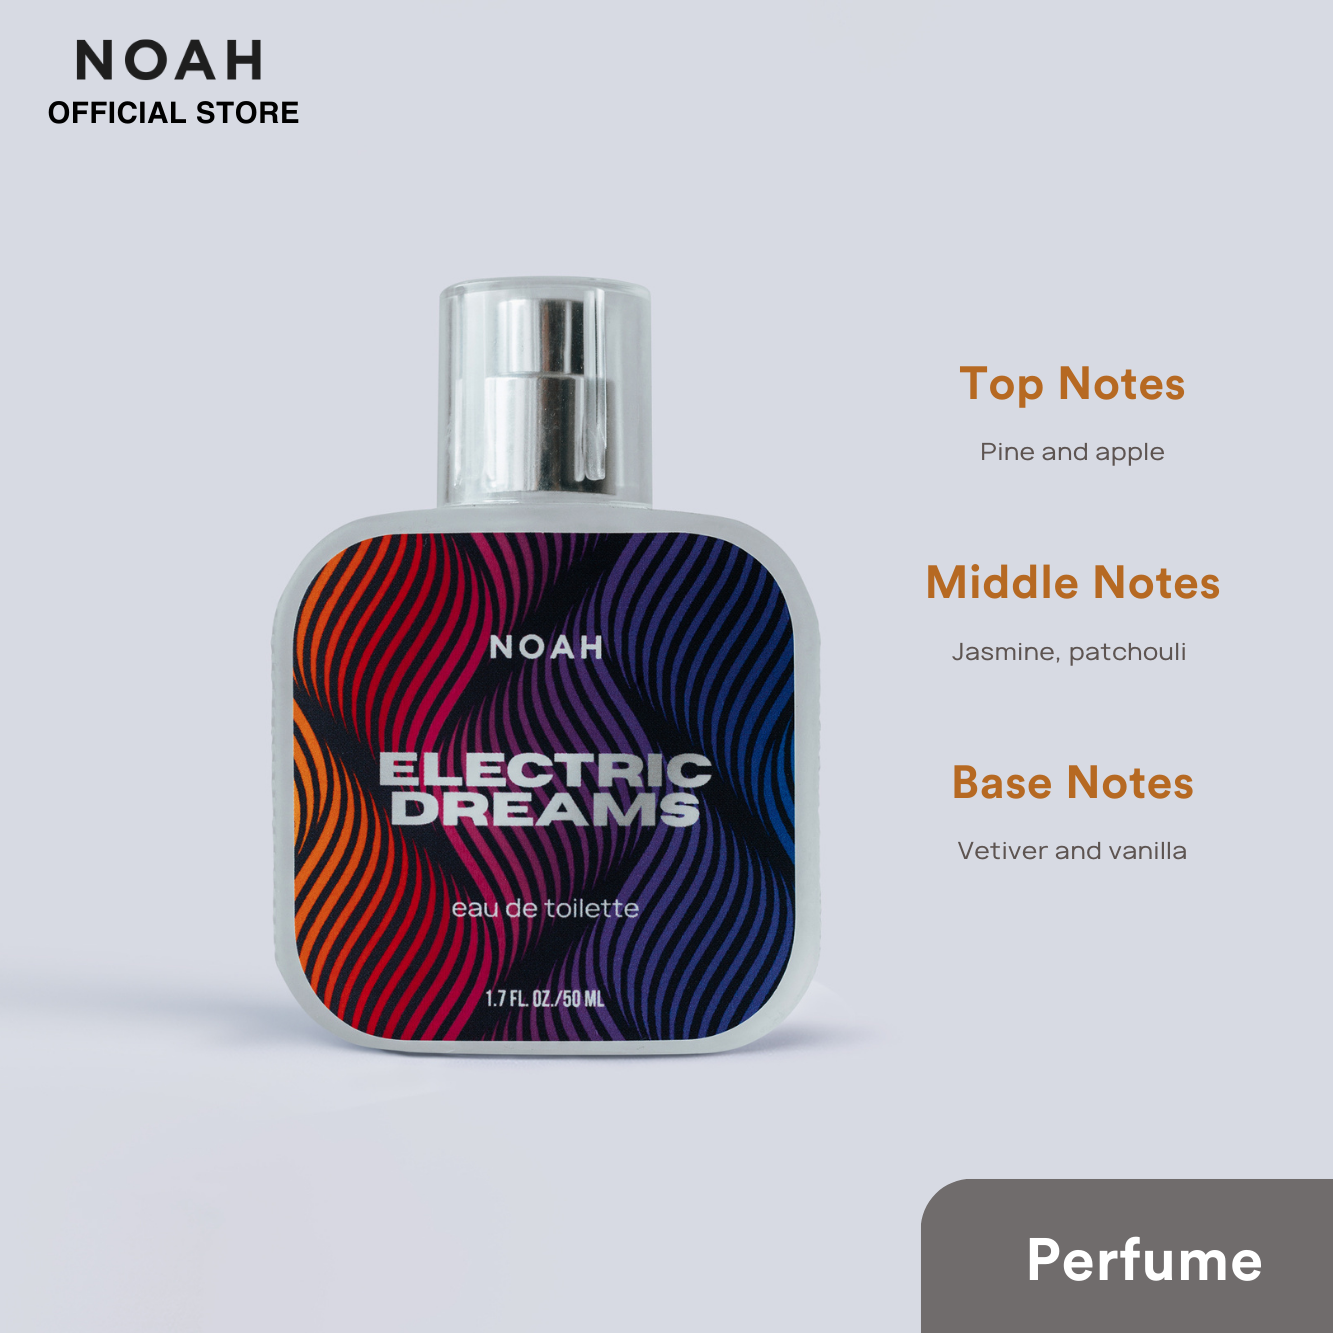 Noah EDT Collection in a Box [Mixed 3 pcs set]